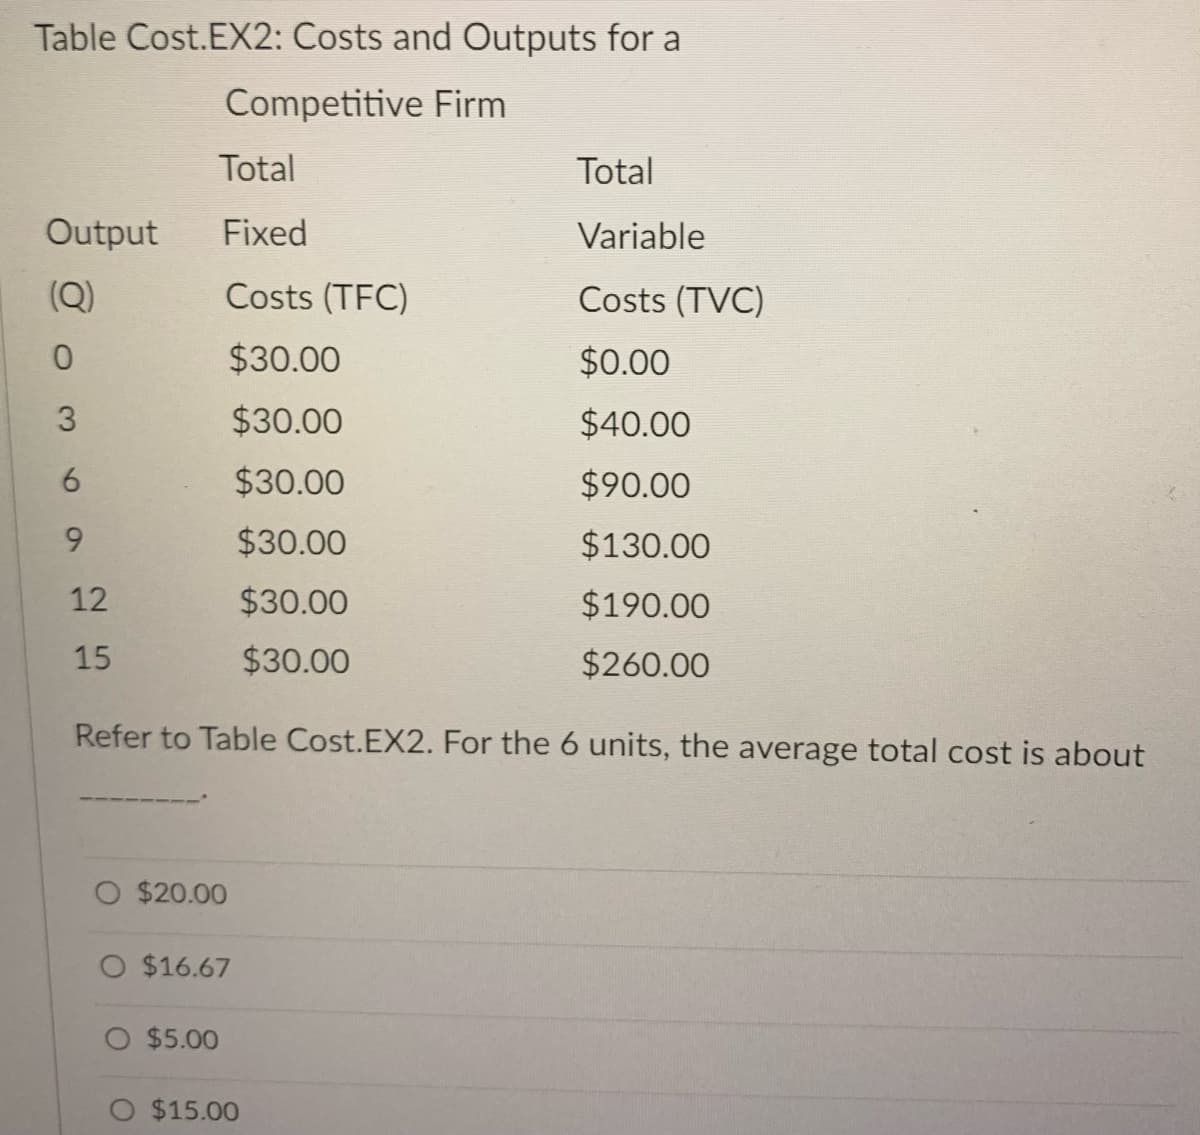 Table Cost.EX2: Costs and Outputs for a
Competitive Firm
Total
Total
Output
Fixed
Variable
(Q)
Costs (TFC)
Costs (TVC)
$30.00
$0.00
3.
$30.00
$40.00
6.
$30.00
$90.00
9.
$30.00
$130.00
12
$30.00
$190.00
15
$30.00
$260.00
Refer to Table Cost.EX2. For the 6 units, the average total cost is about
O $20.00
O $16.67
O $5.00
$15.00
